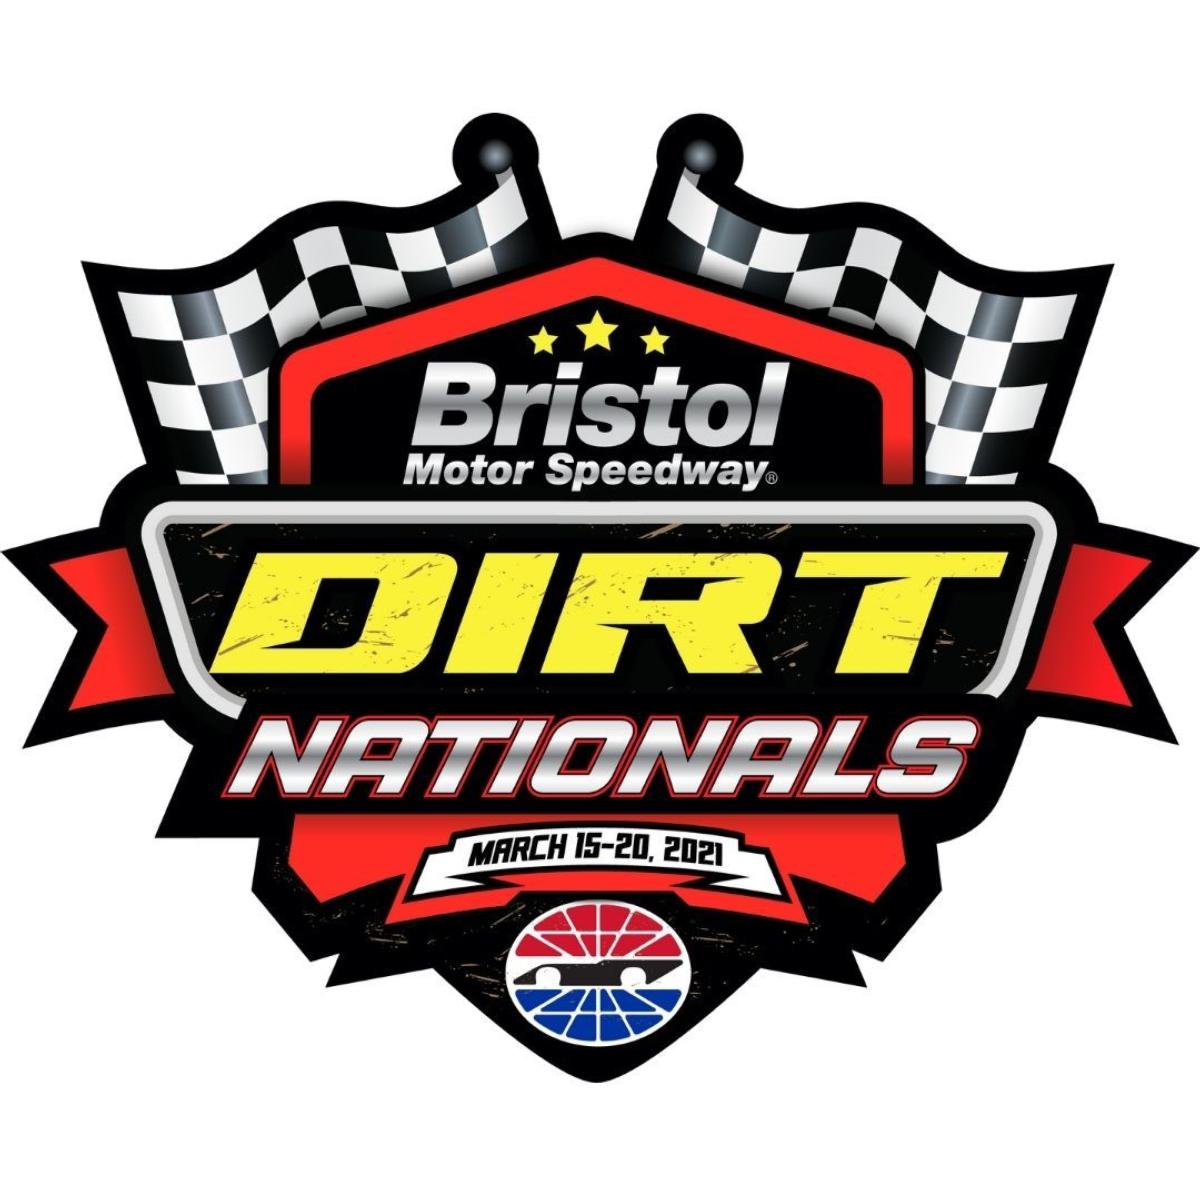 New Bristol Dirt Nationals event coming to BMS March 15-20 News Media Bristol Motor Speedway